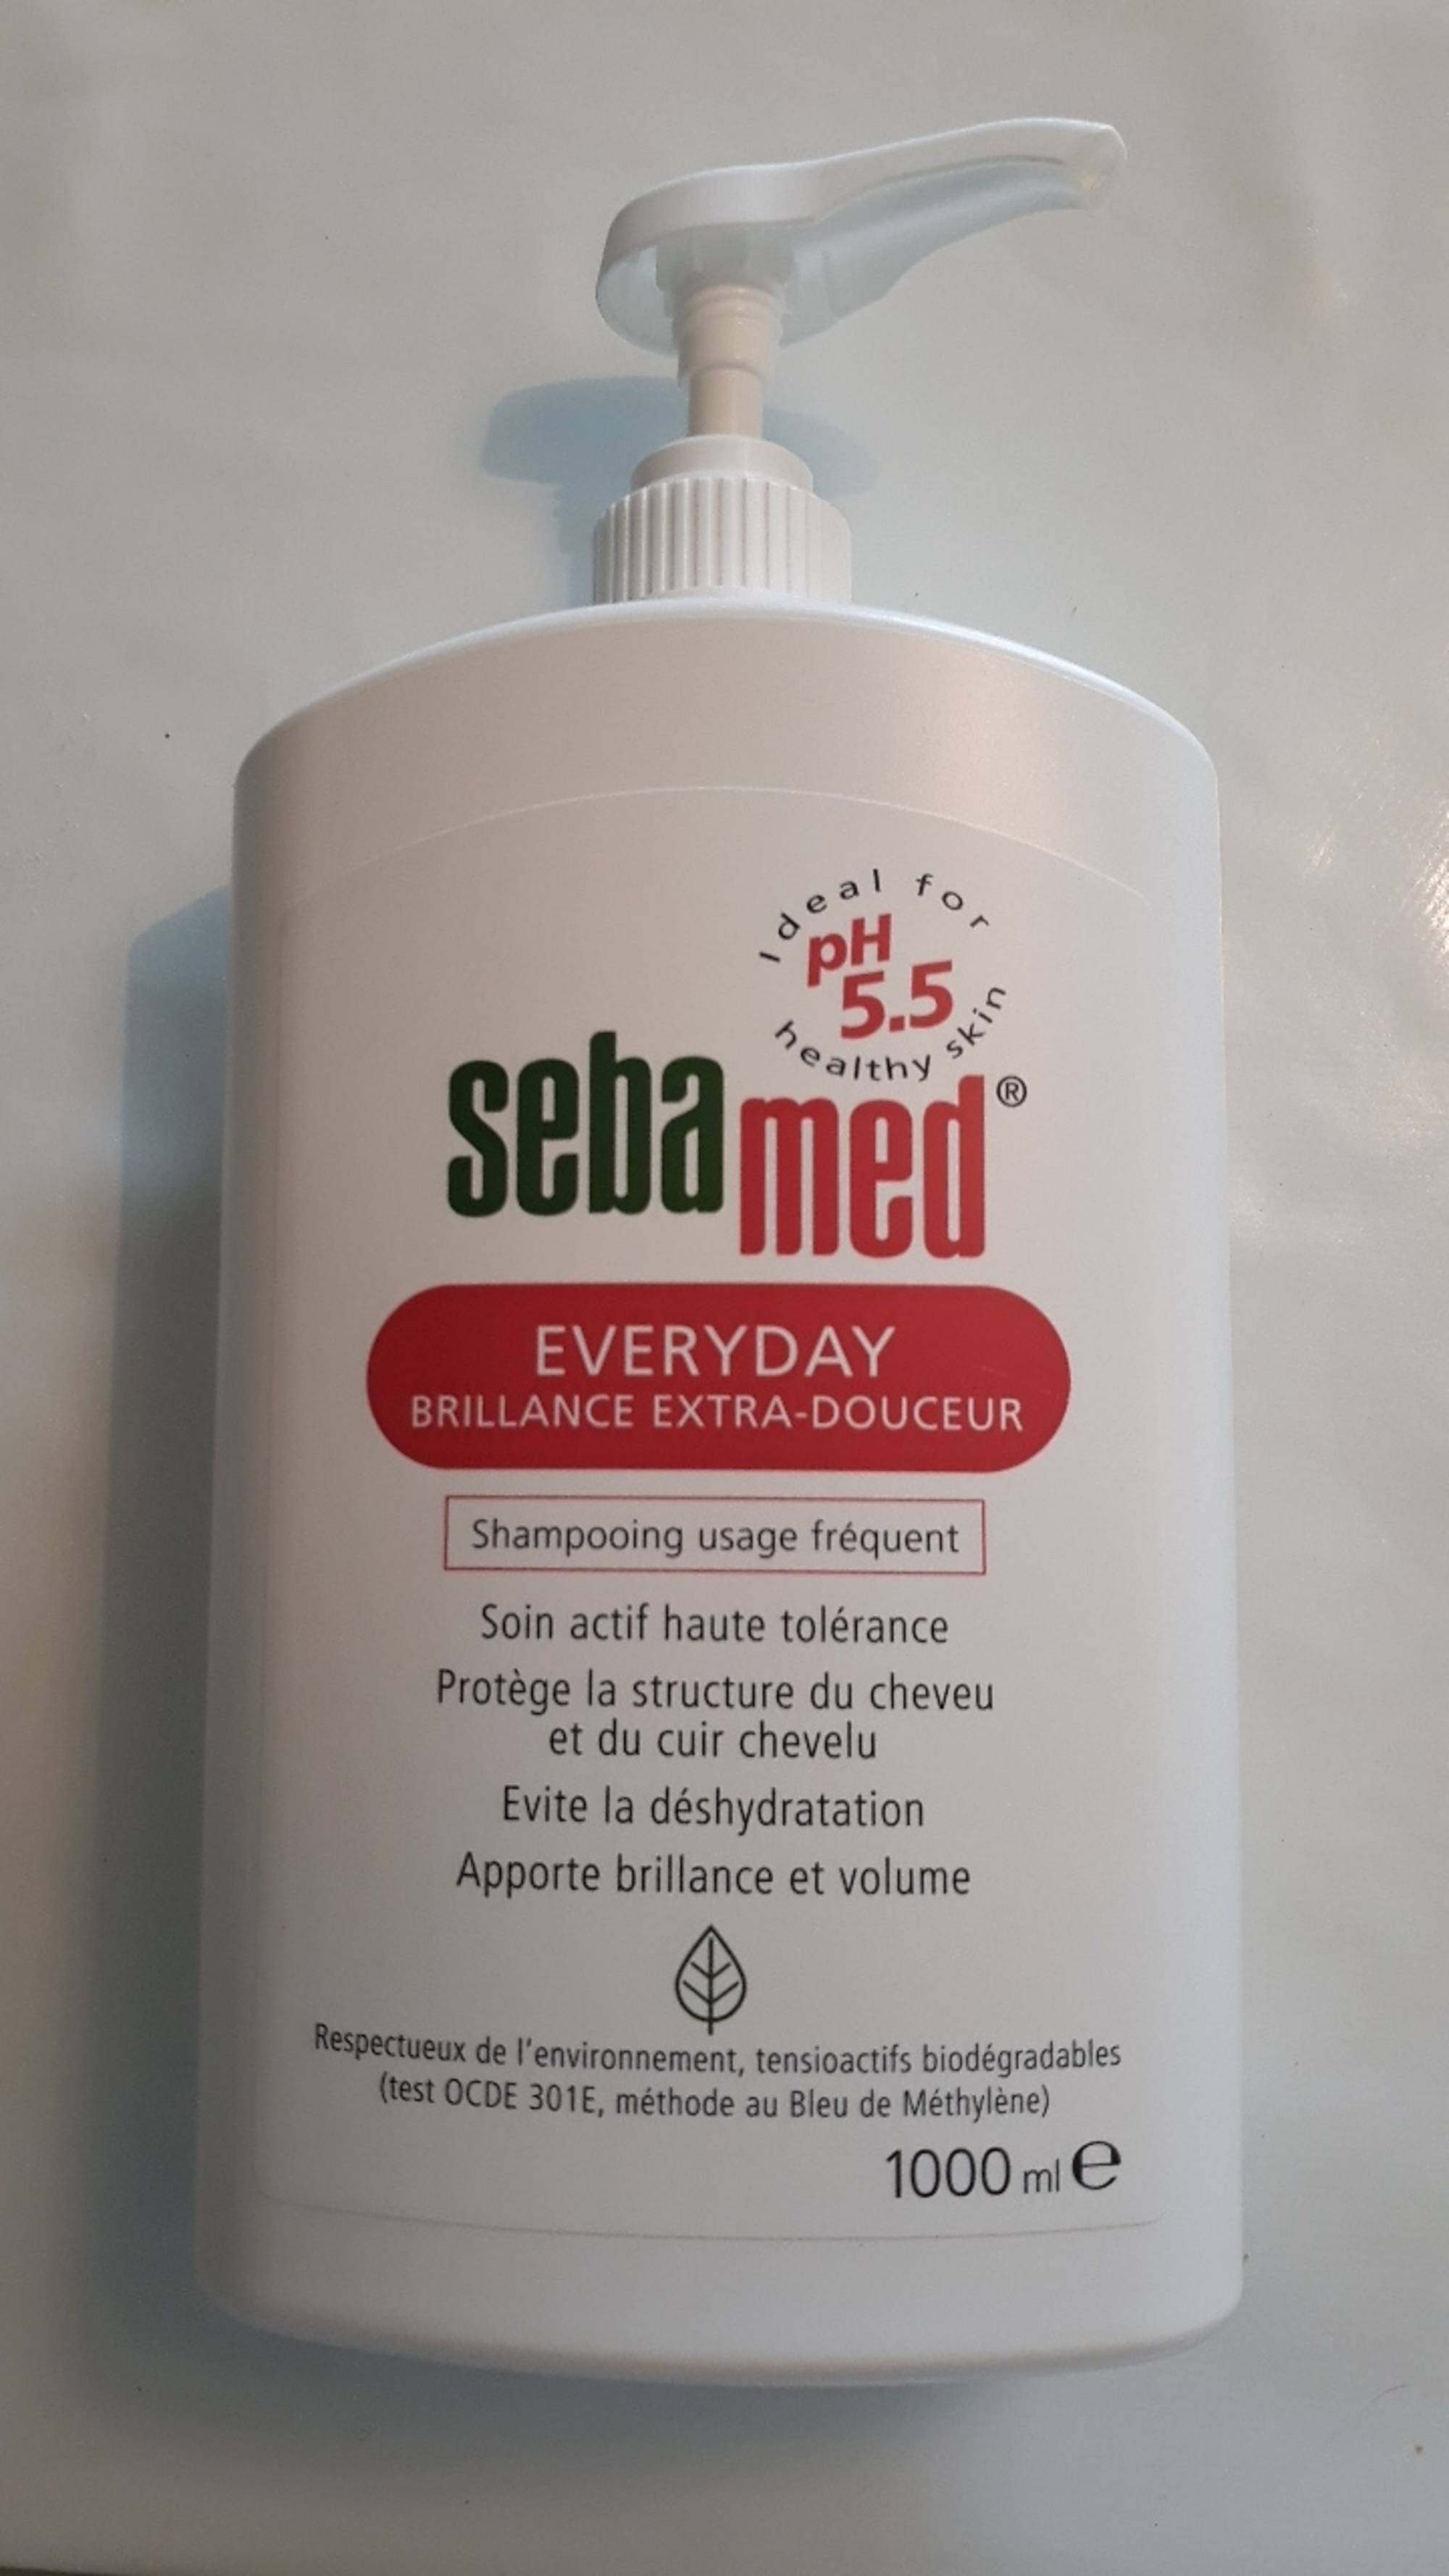 SEBAMED - Everyday - Shampooing usage fréquent